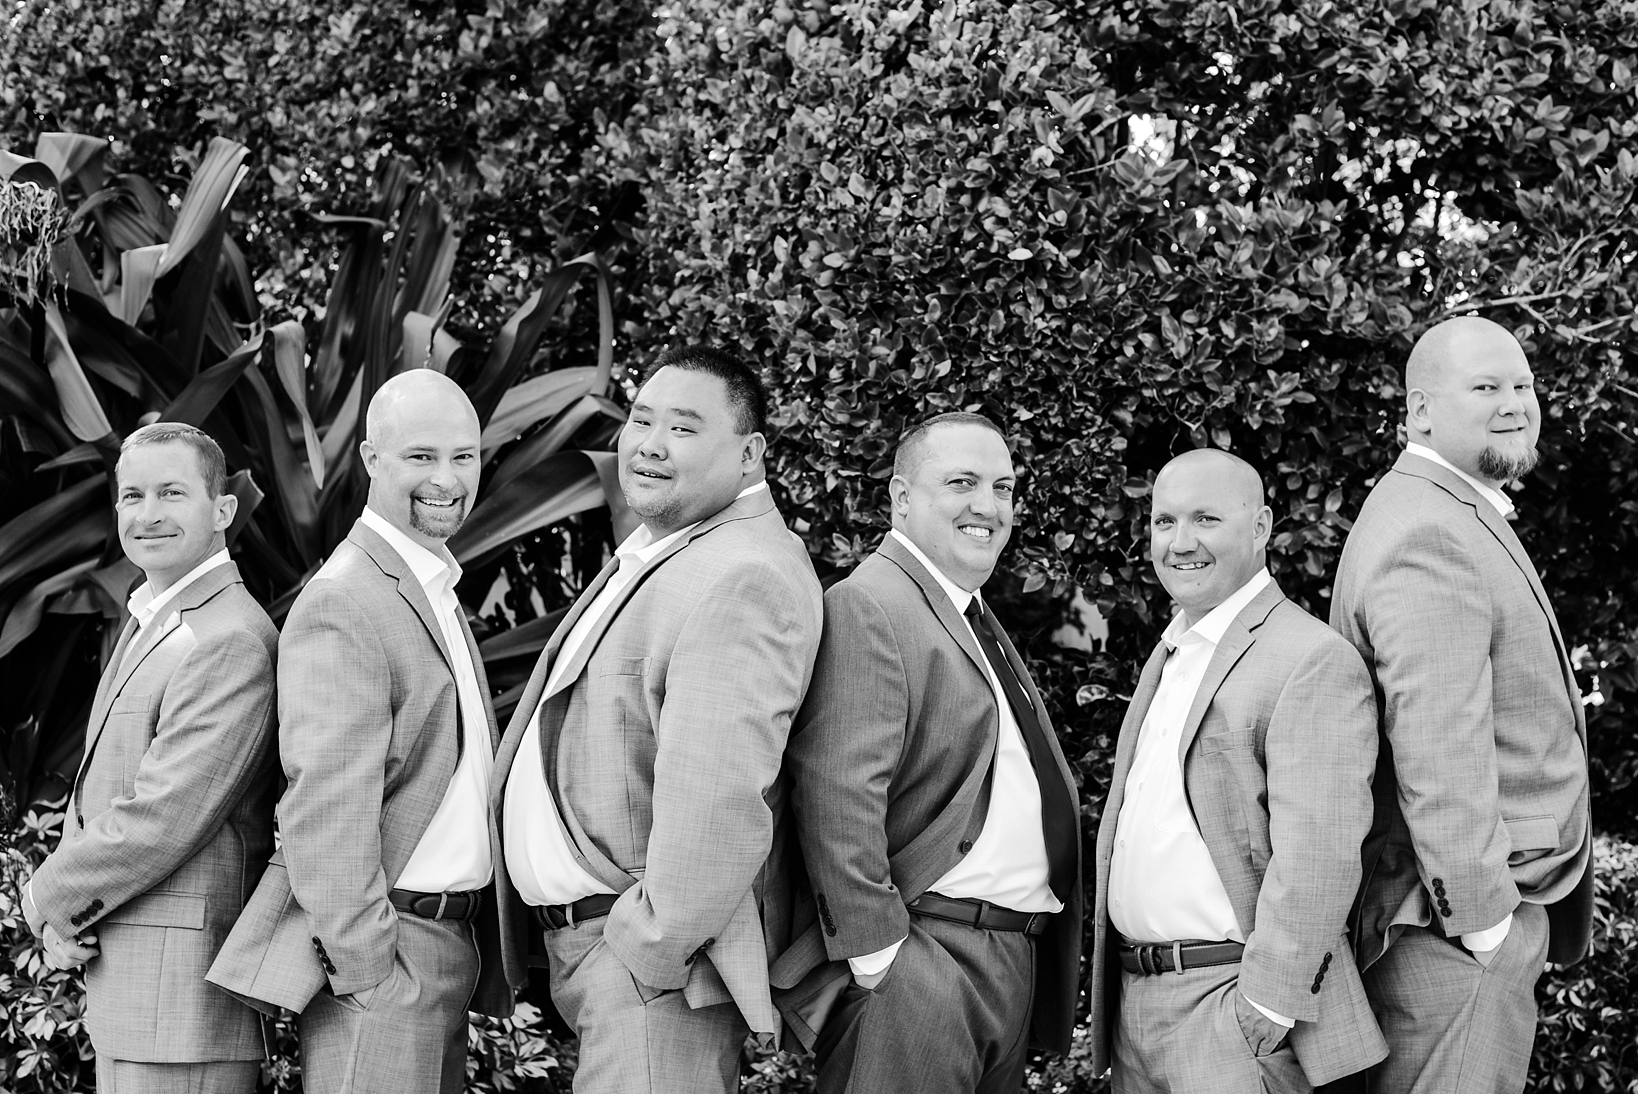 Groom and his Groomsmen strike a pose in black and white